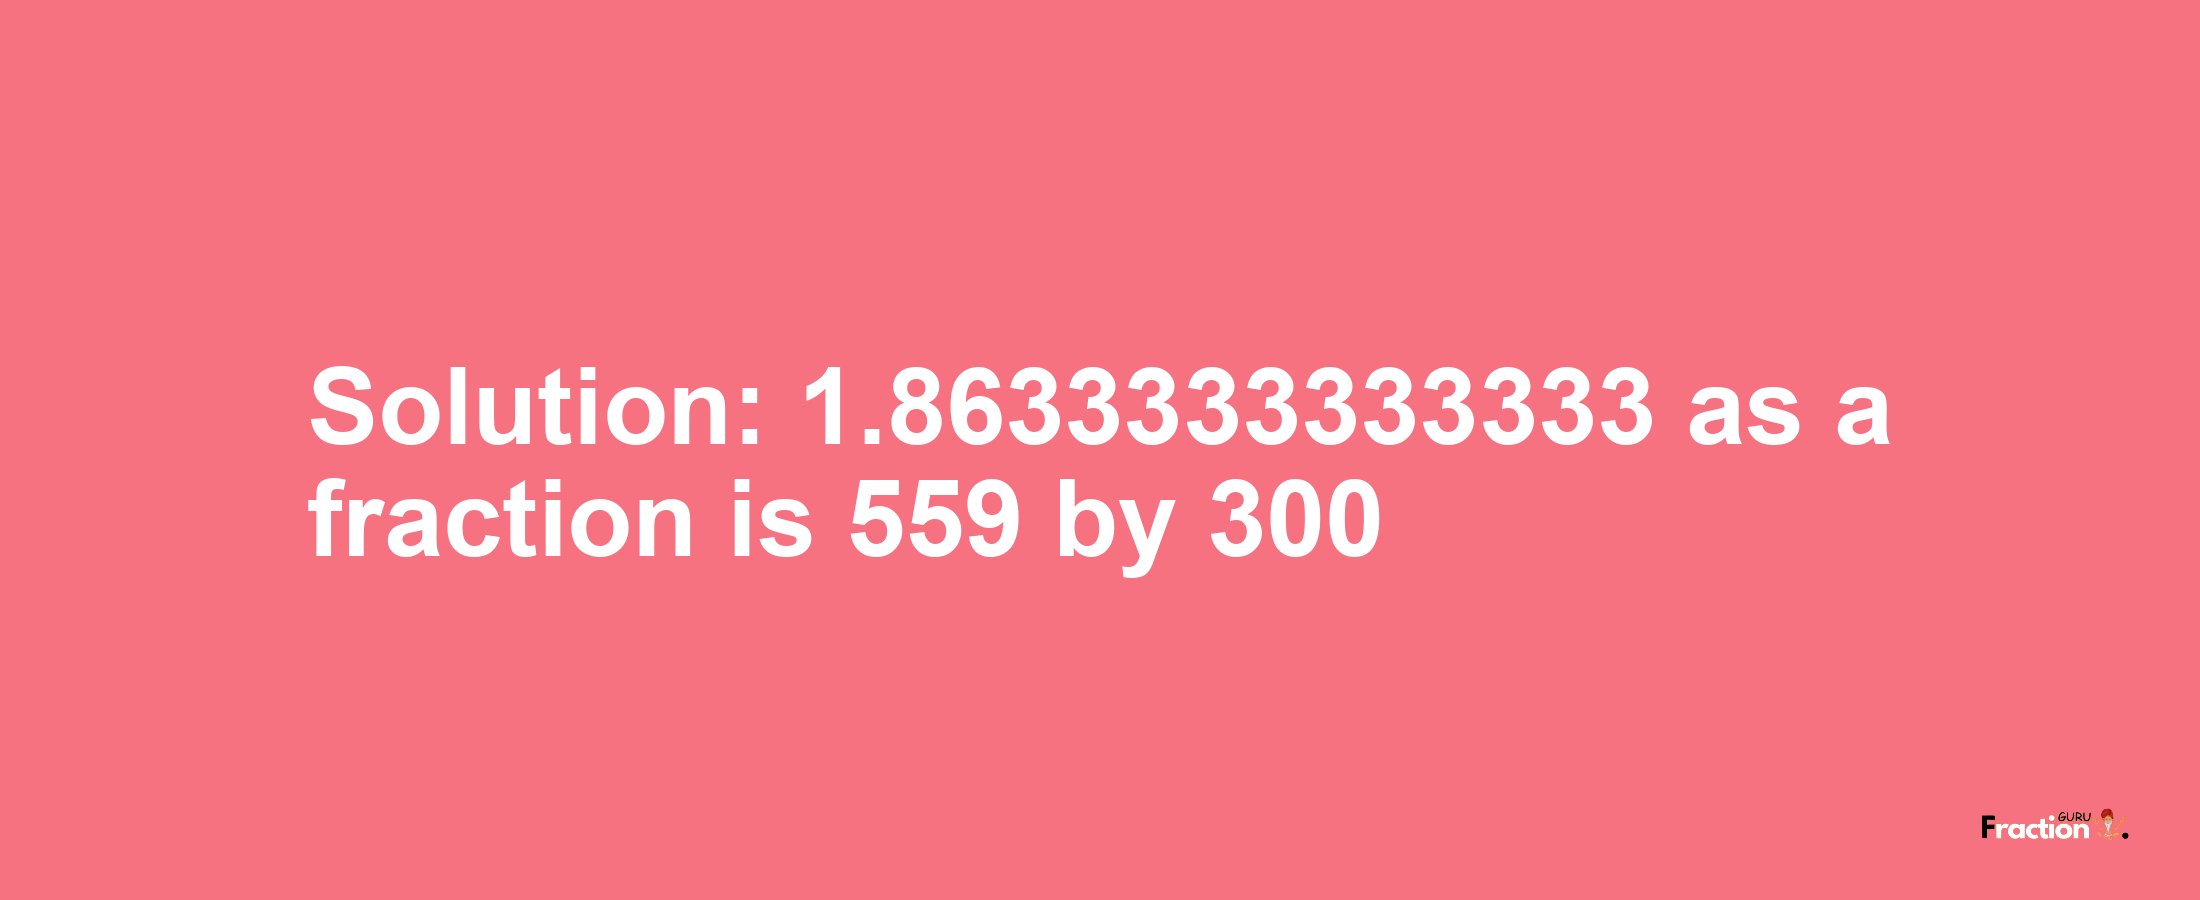 Solution:1.8633333333333 as a fraction is 559/300